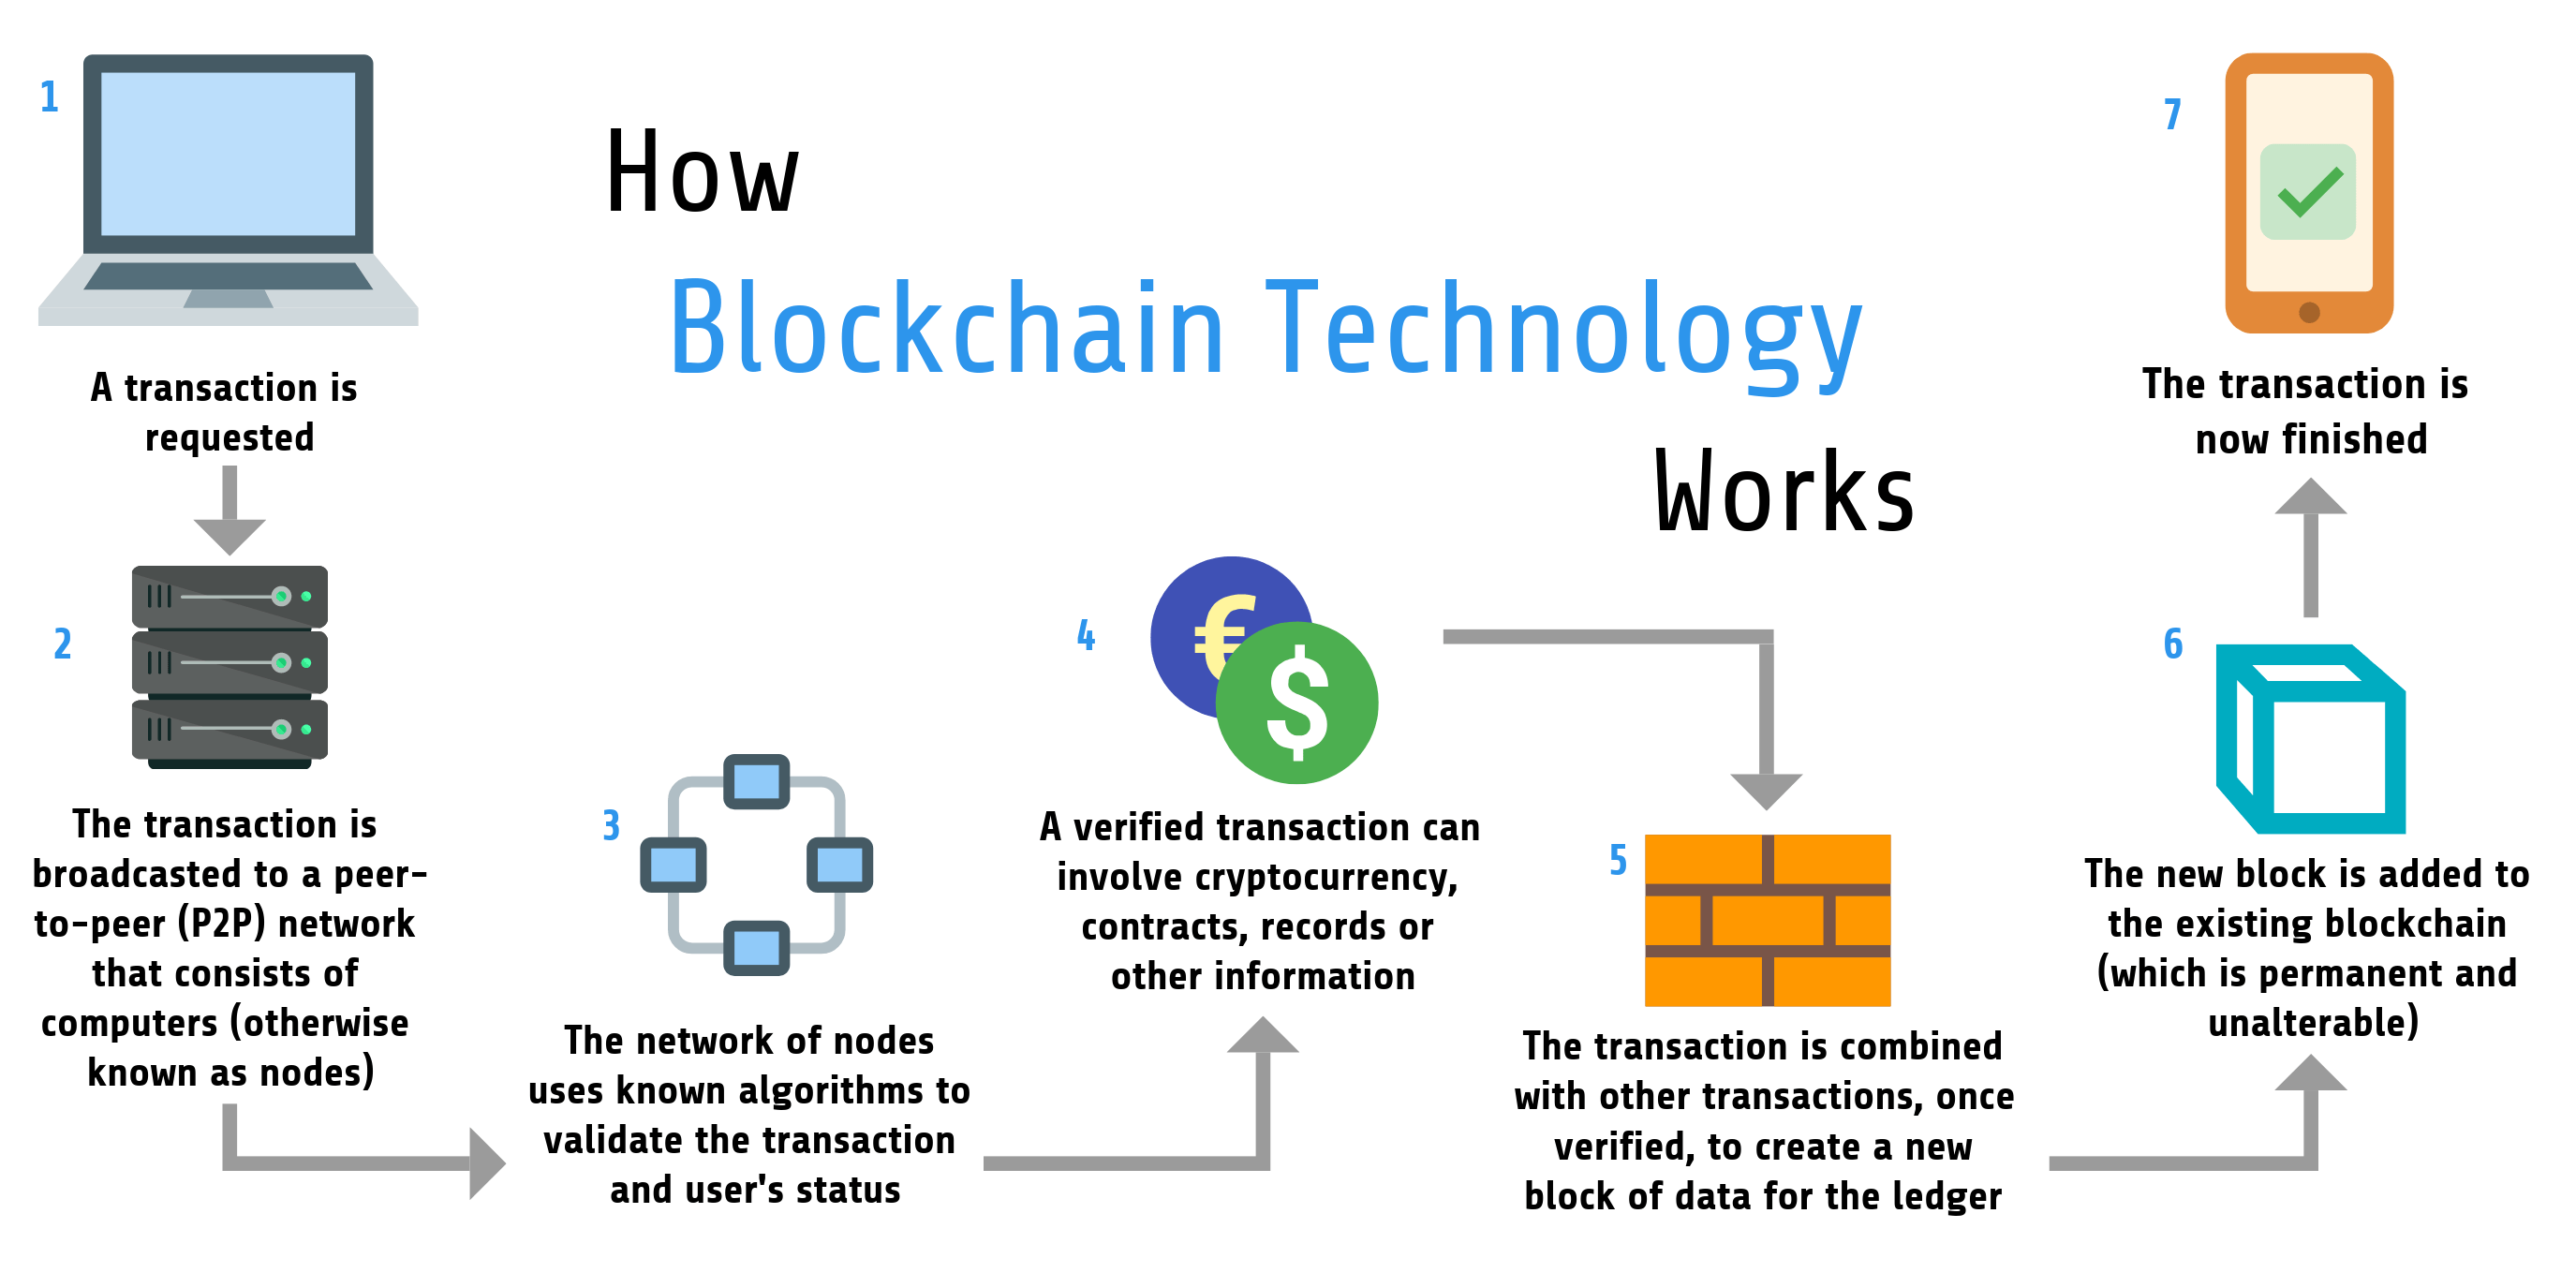 How does a blockchain work?